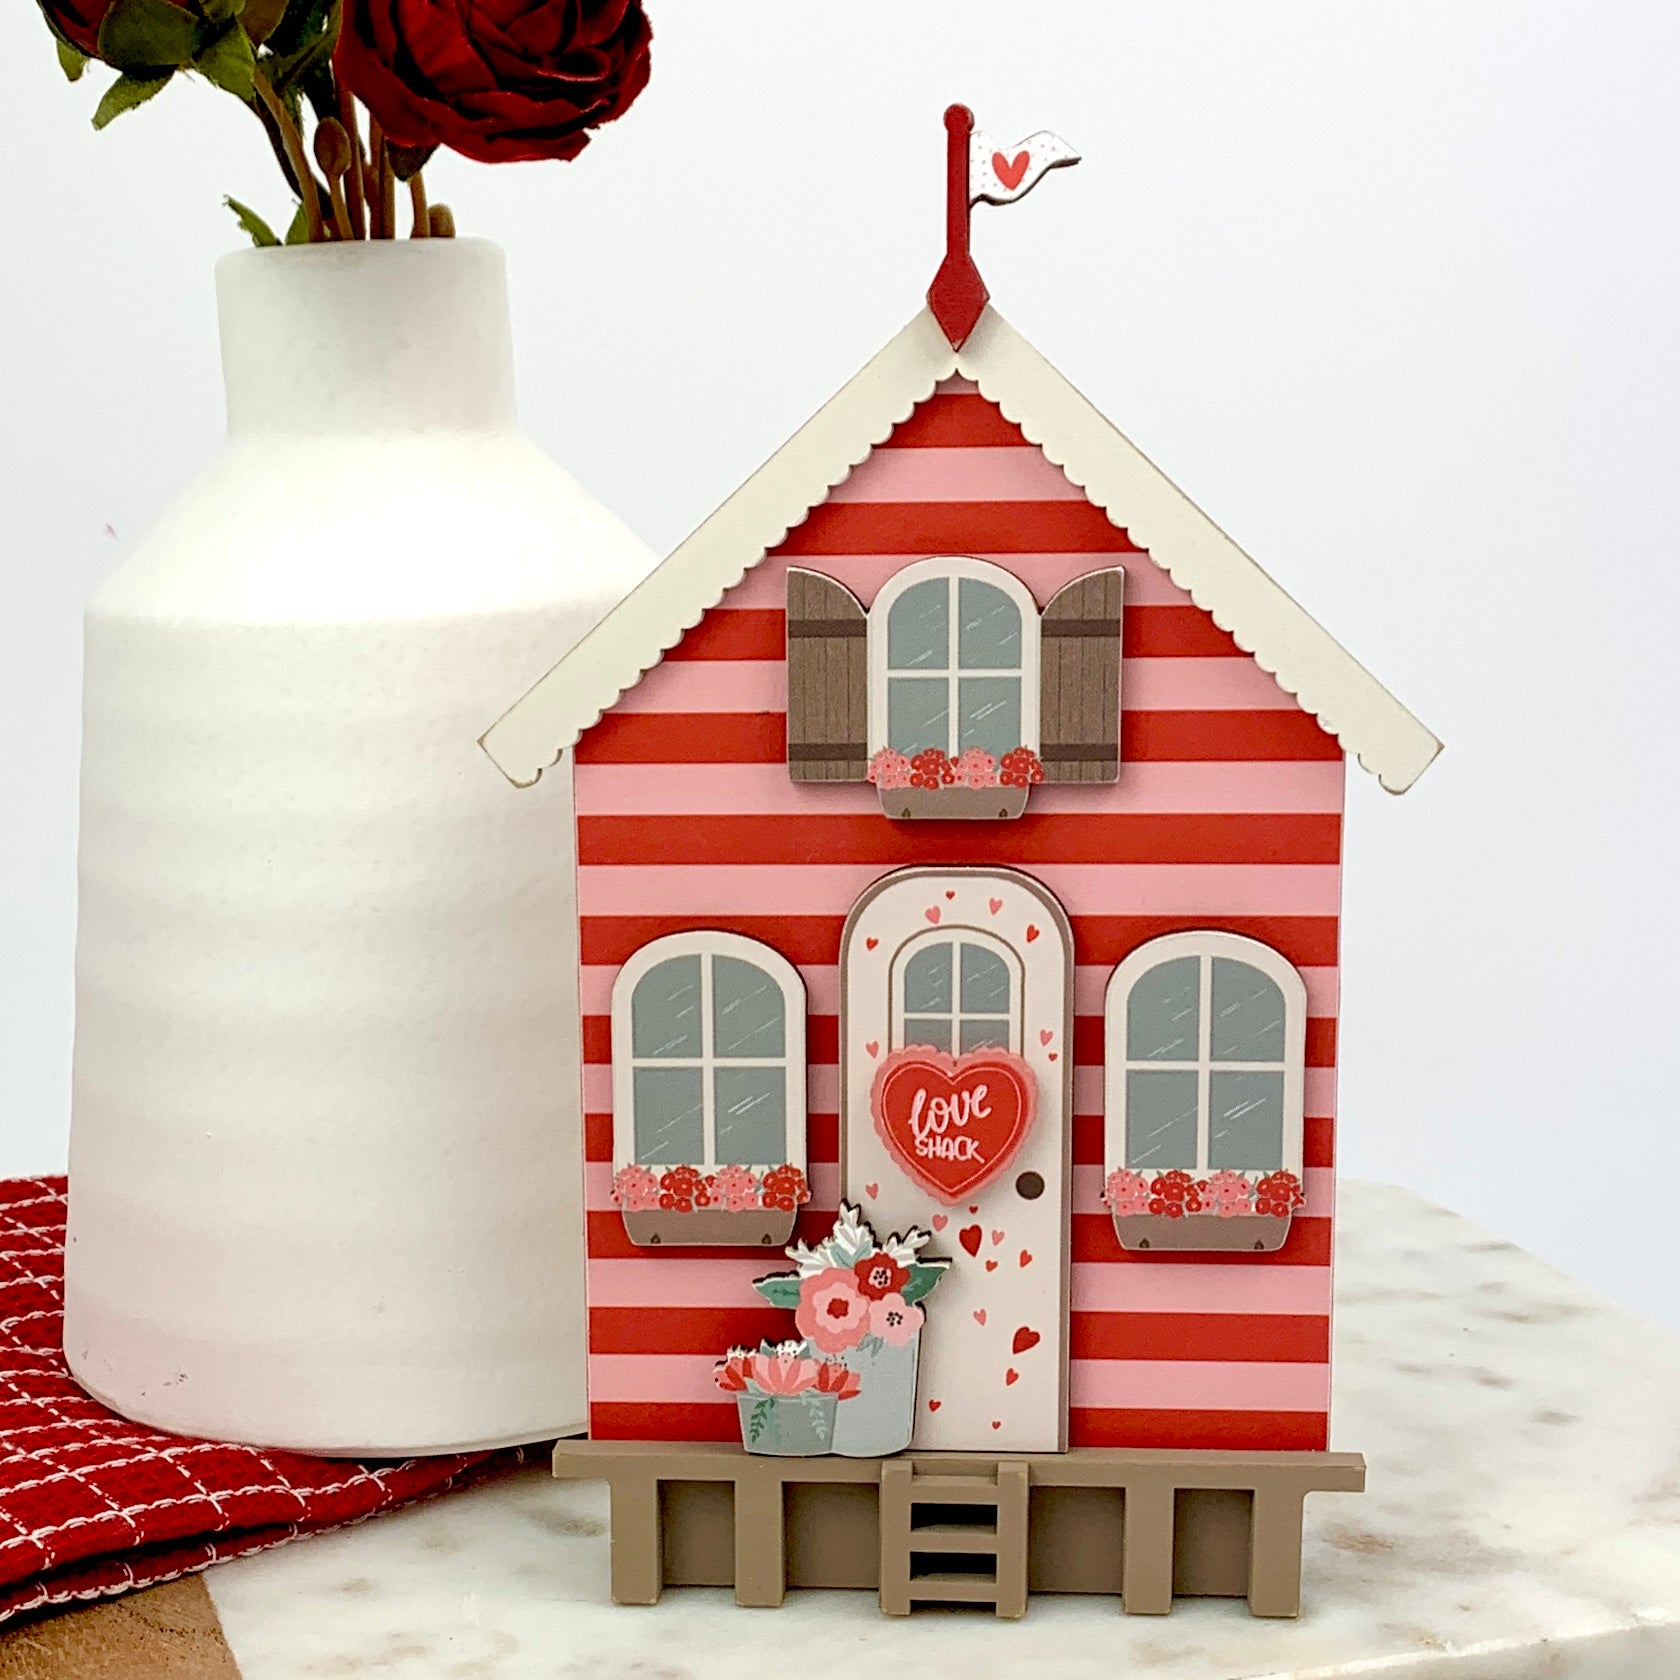 Happy Valentine's Day – Building The Love Shack